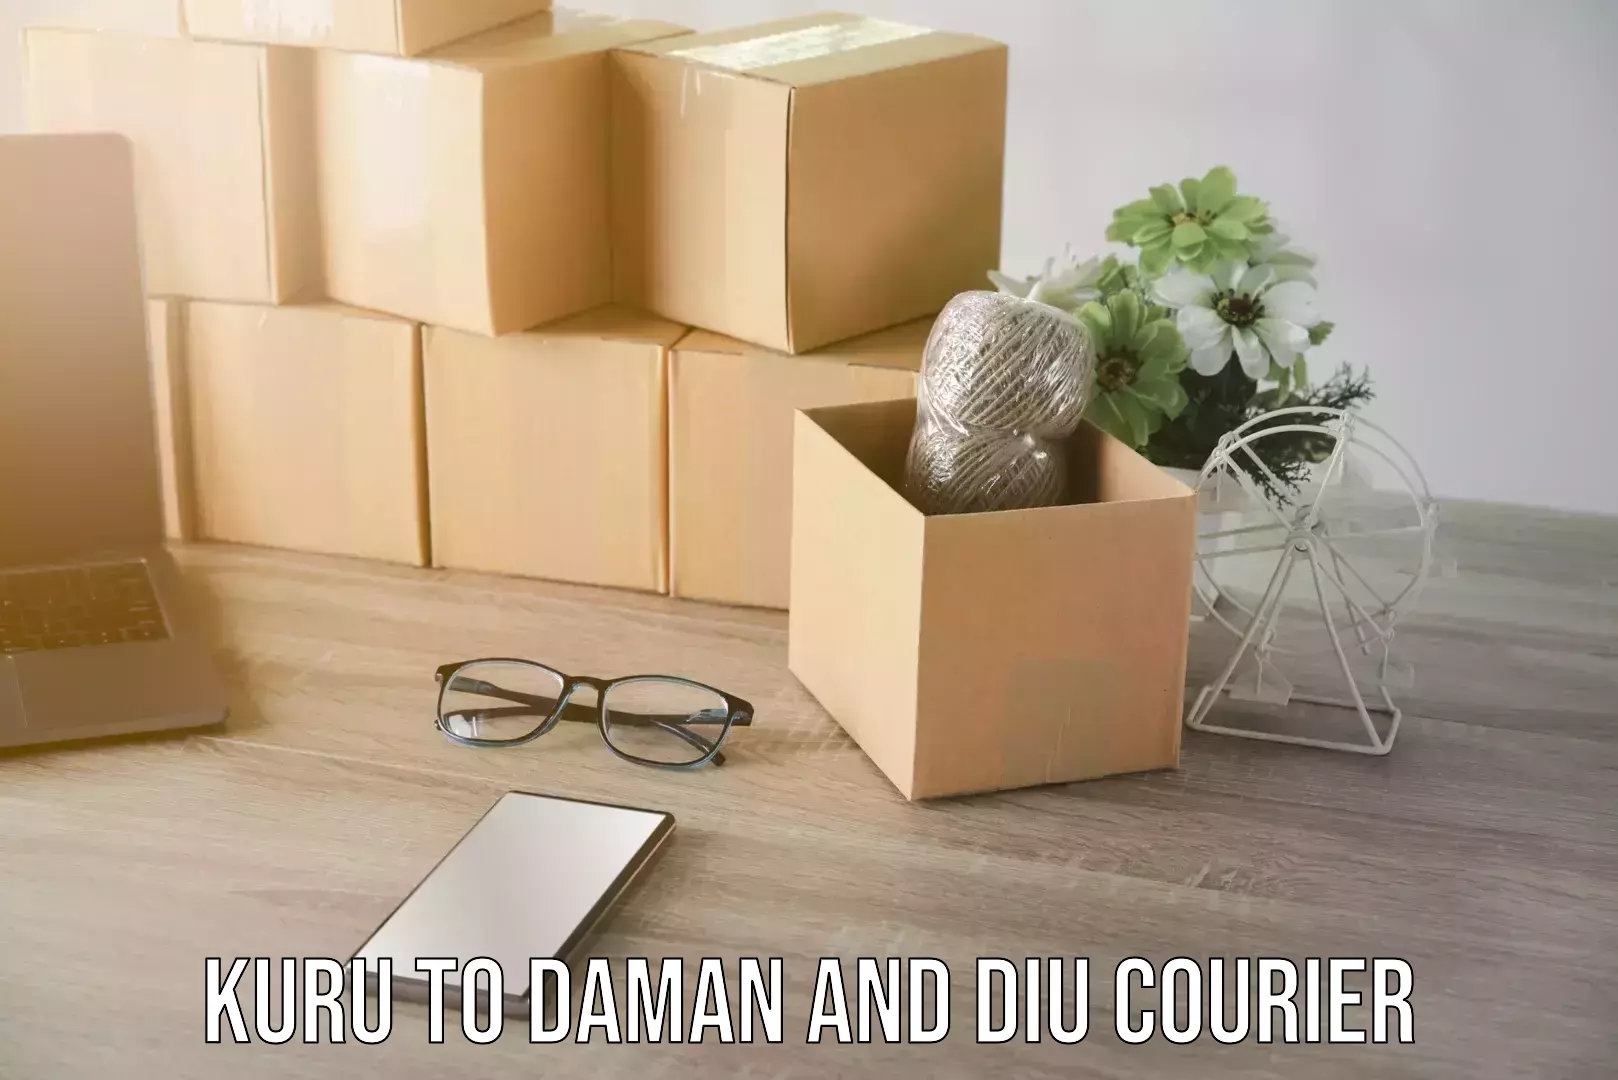 Quality moving services in Kuru to Daman and Diu